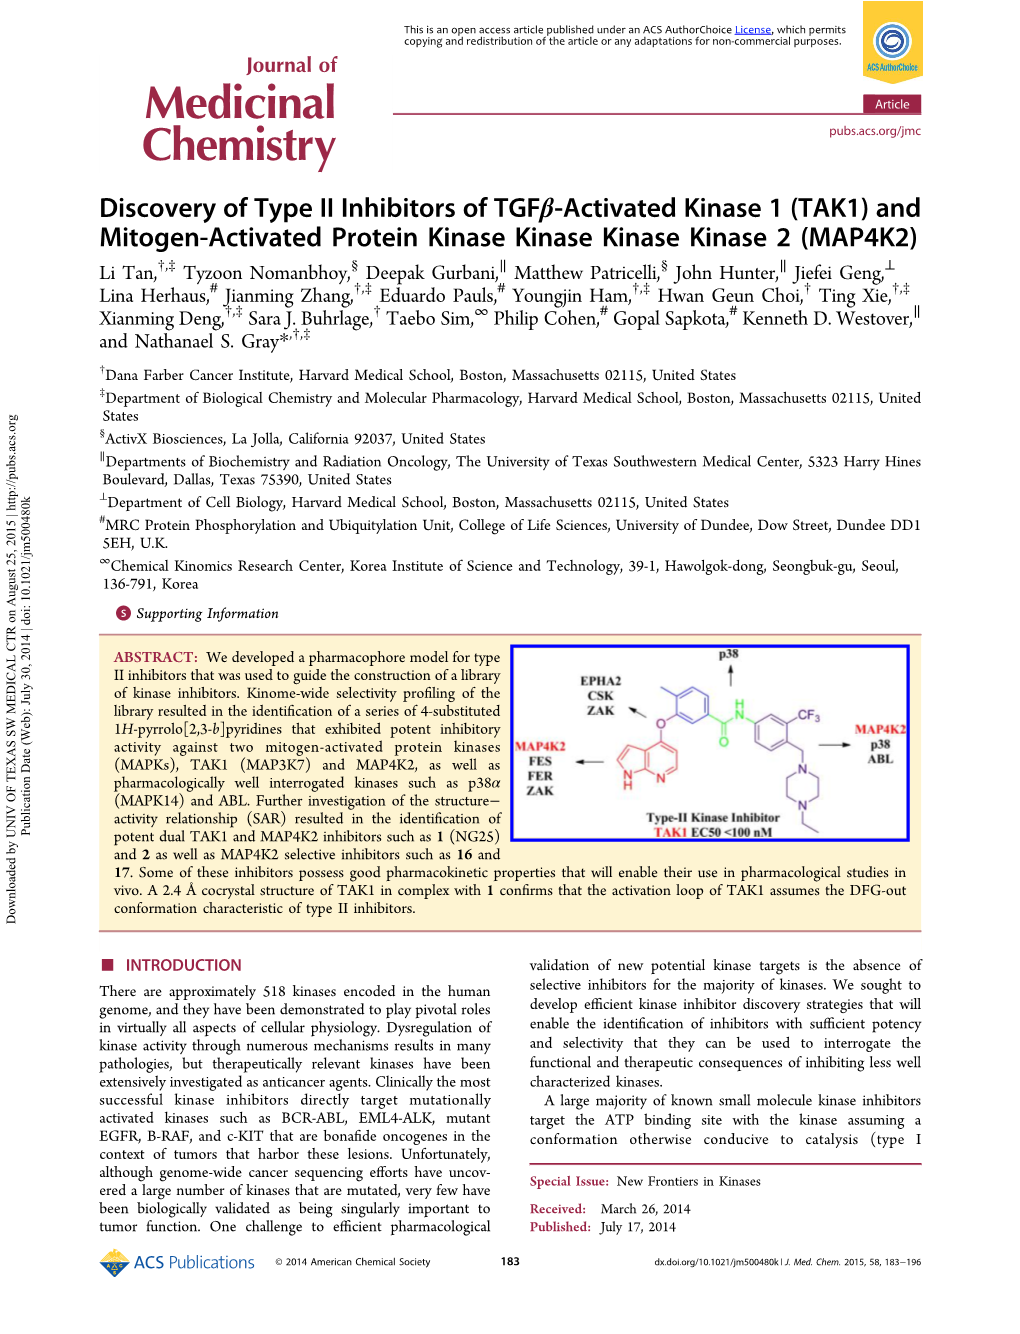 Discovery of Type II Inhibitors of Tgfβ-Activated Kinase 1 (TAK1)